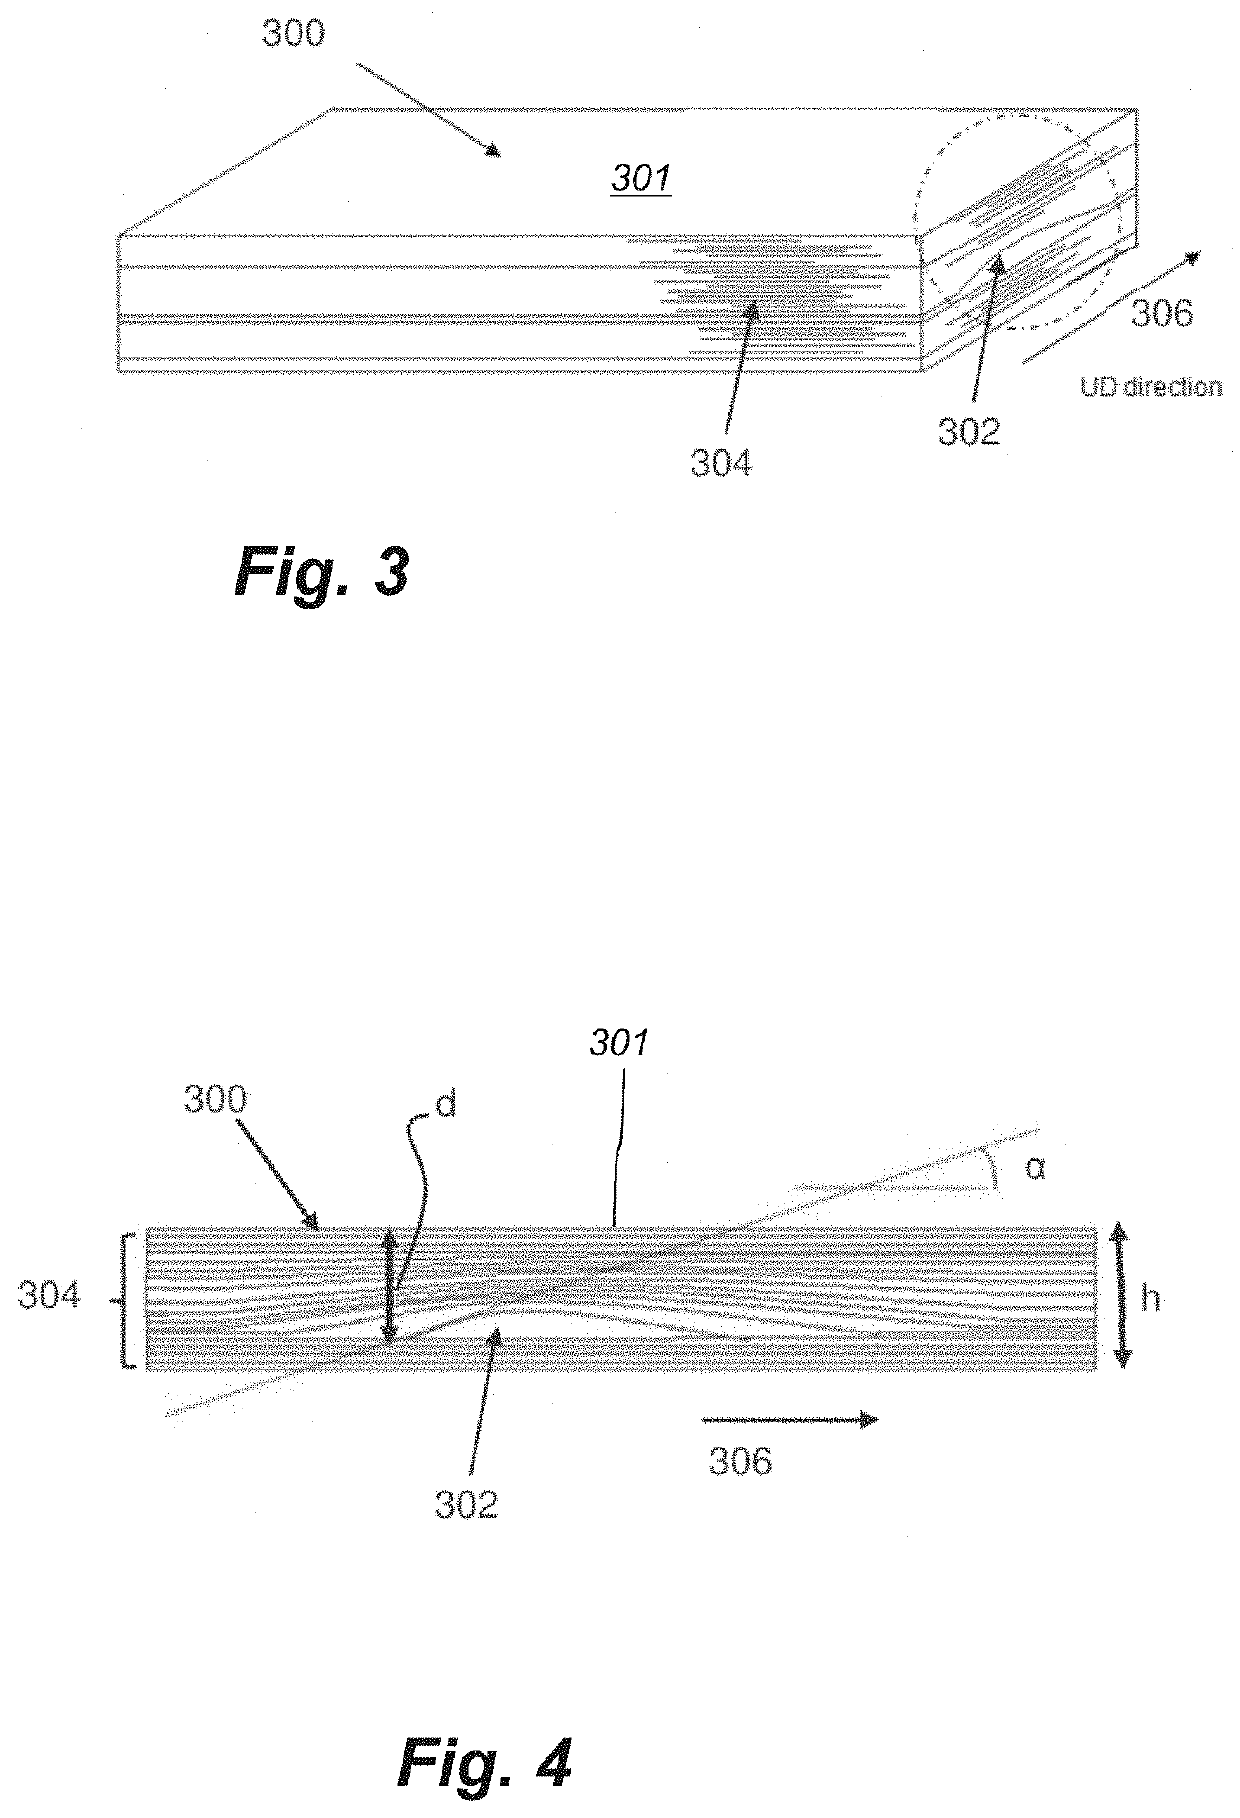 Dual scan method for detecting a fibre misalignment in an elongated structure